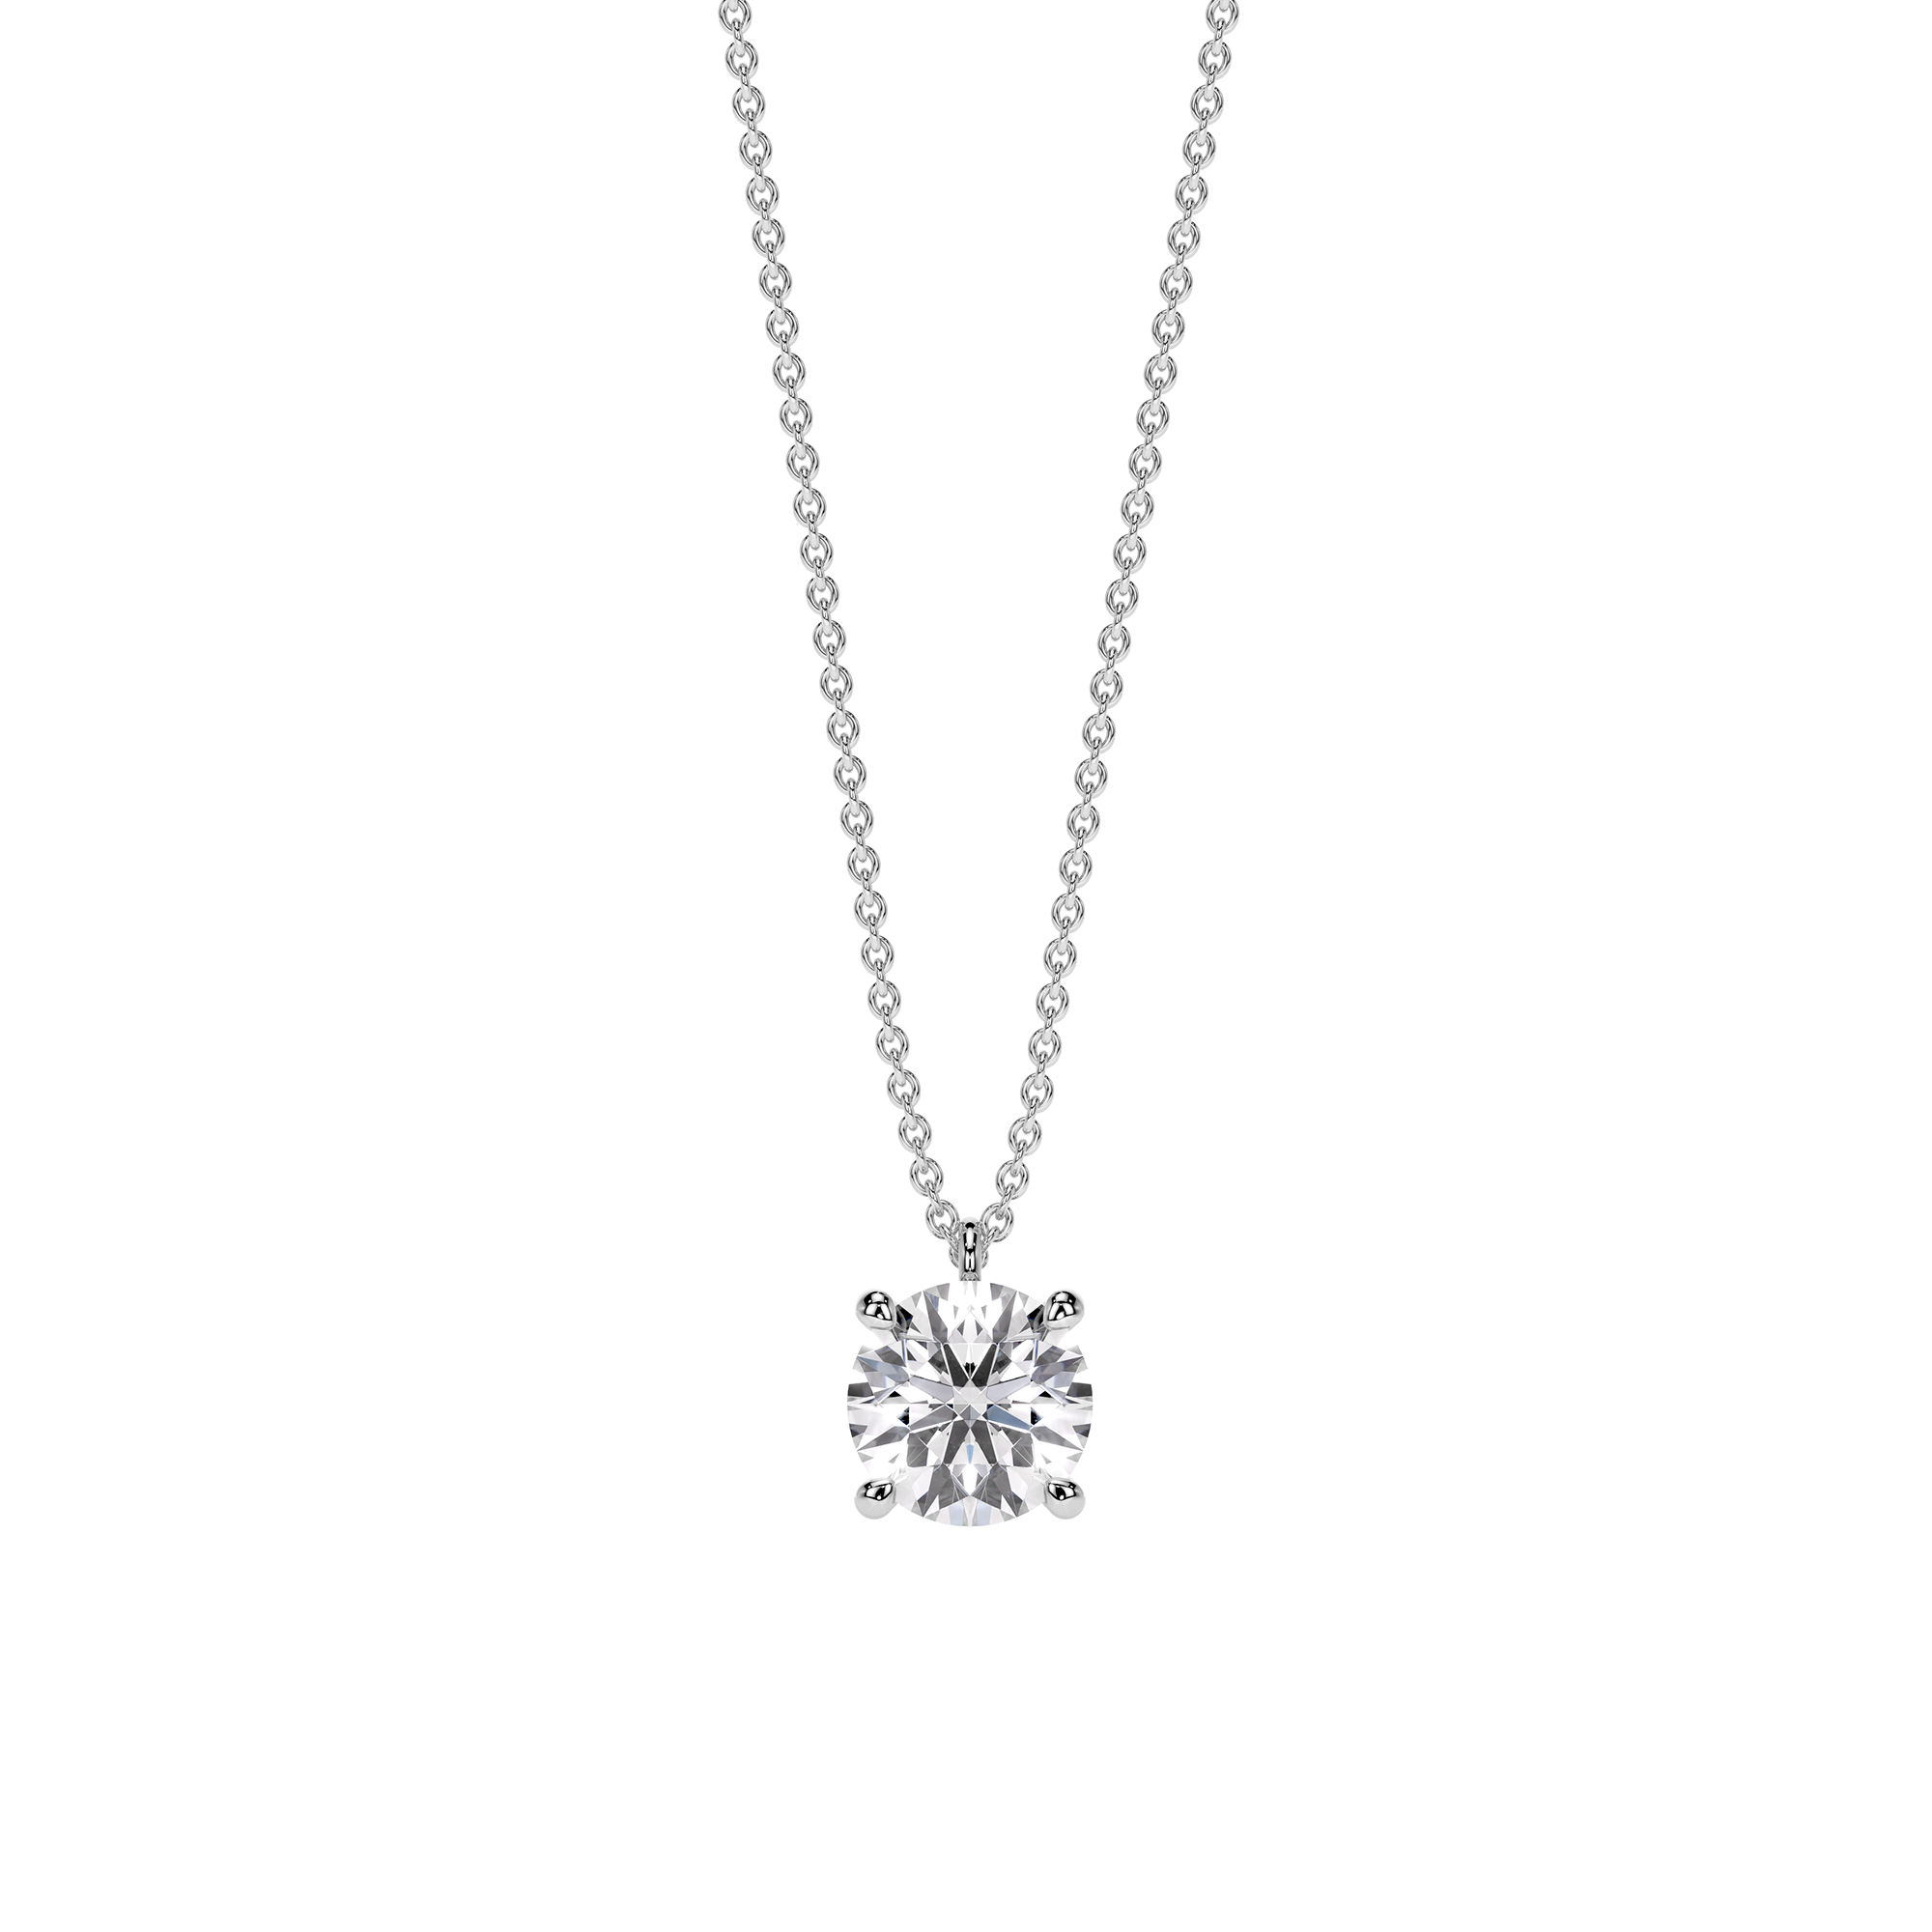 14 k white gold Solitaire necklace, with 1 white 2.00 ct diamond